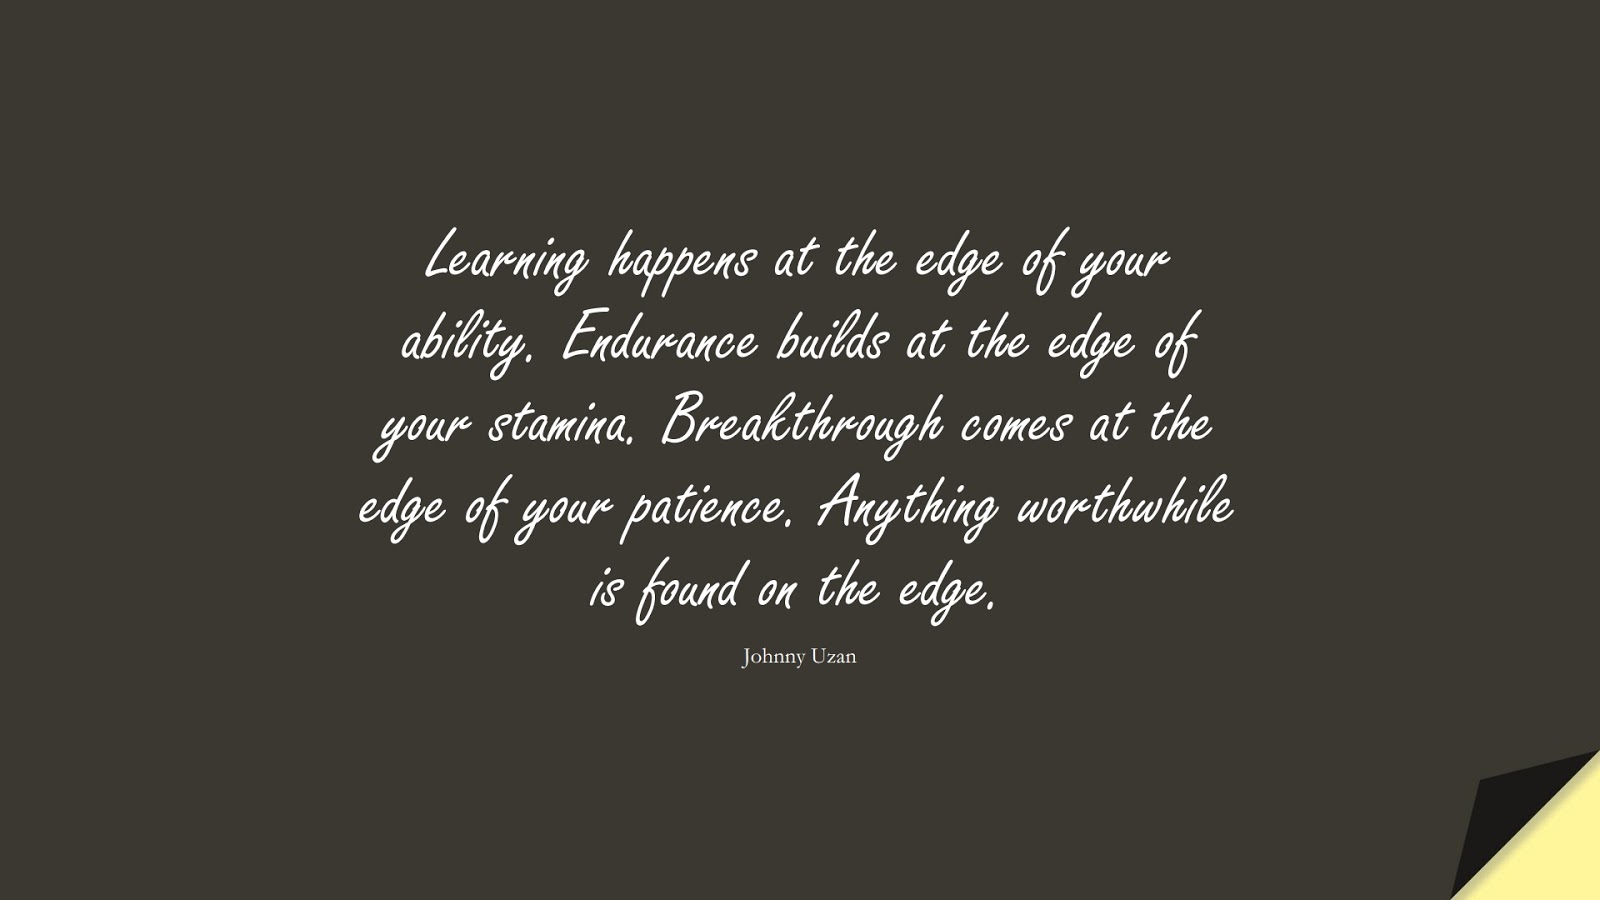 Learning happens at the edge of your ability. Endurance builds at the edge of your stamina. Breakthrough comes at the edge of your patience. Anything worthwhile is found on the edge. (Johnny Uzan);  #WordsofWisdom